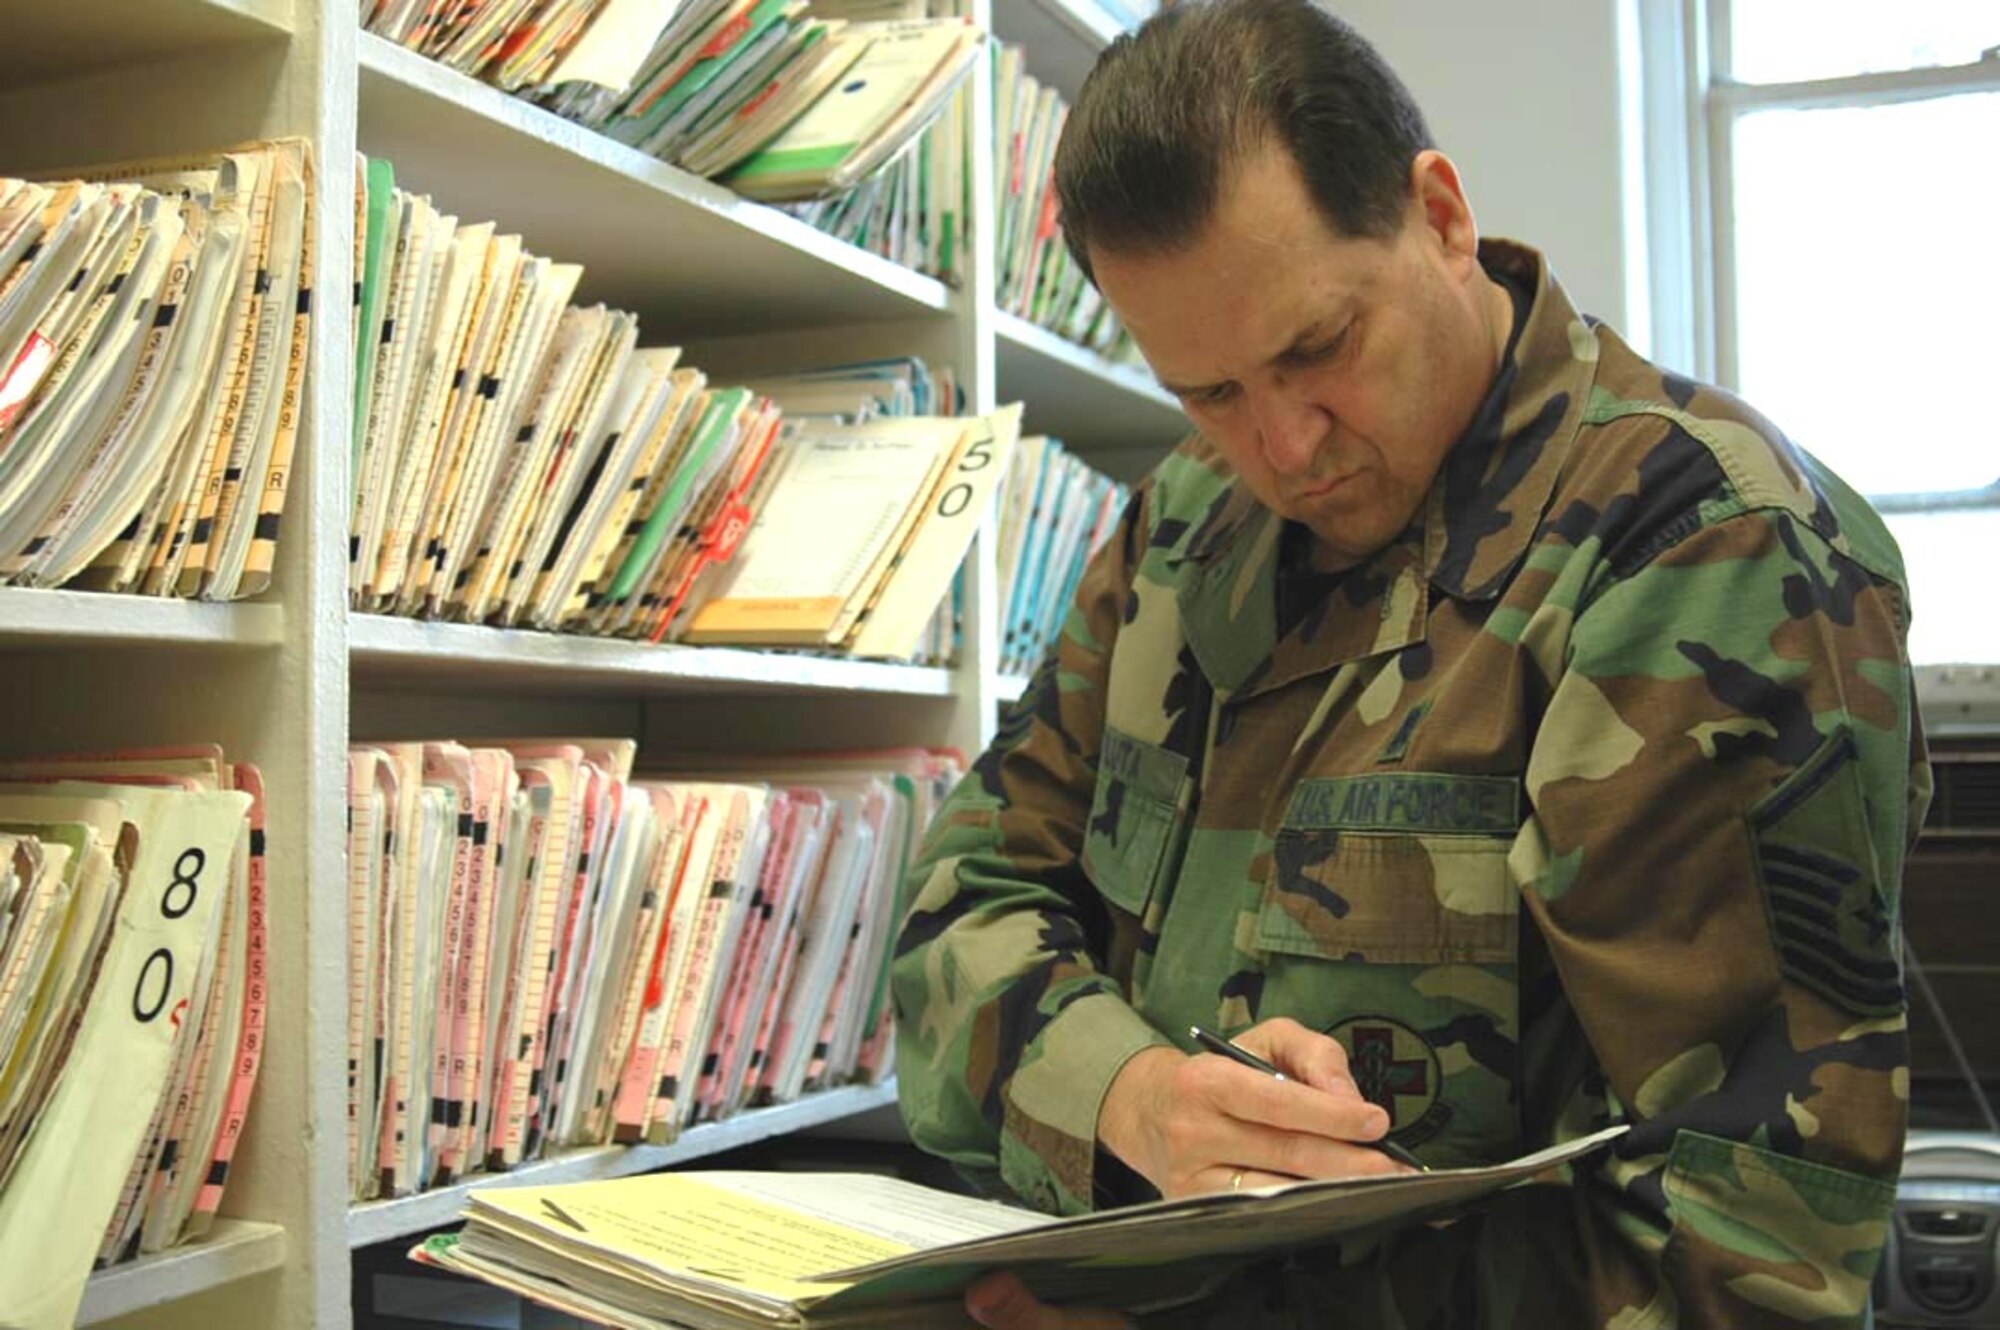 Master Sgt. Thomas Pluta, health service manager, in the record room, checks an Airman's medical record for immunization history. The record room contains over 600 individual medical records. (U.S. Air Force photo/Staff Sgt. Kevin Tomko)